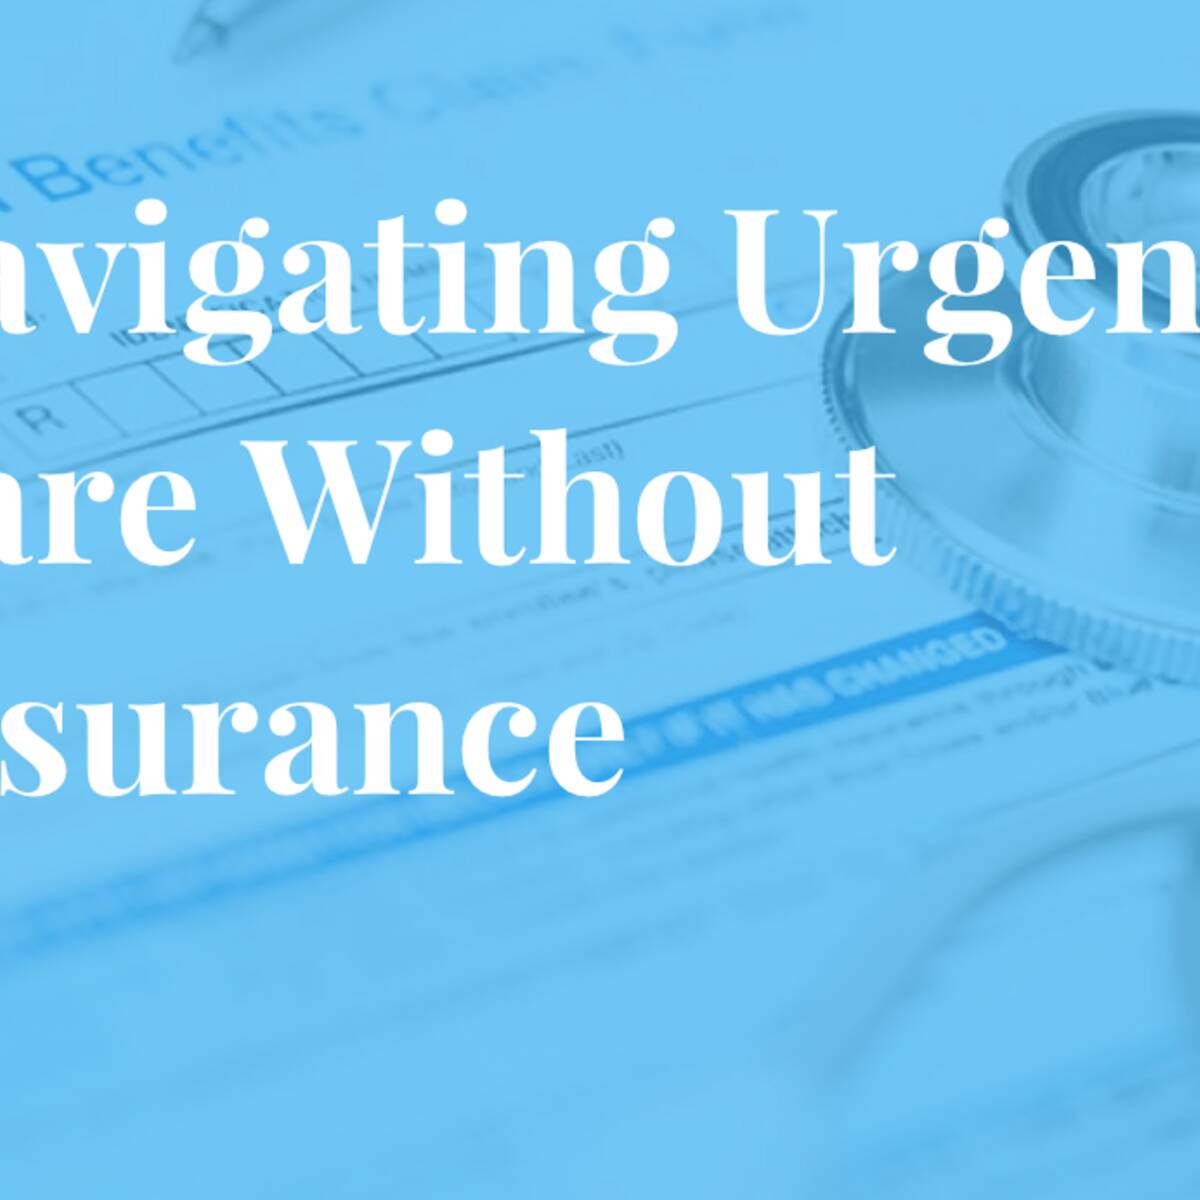 urgent care visit without insurance cost